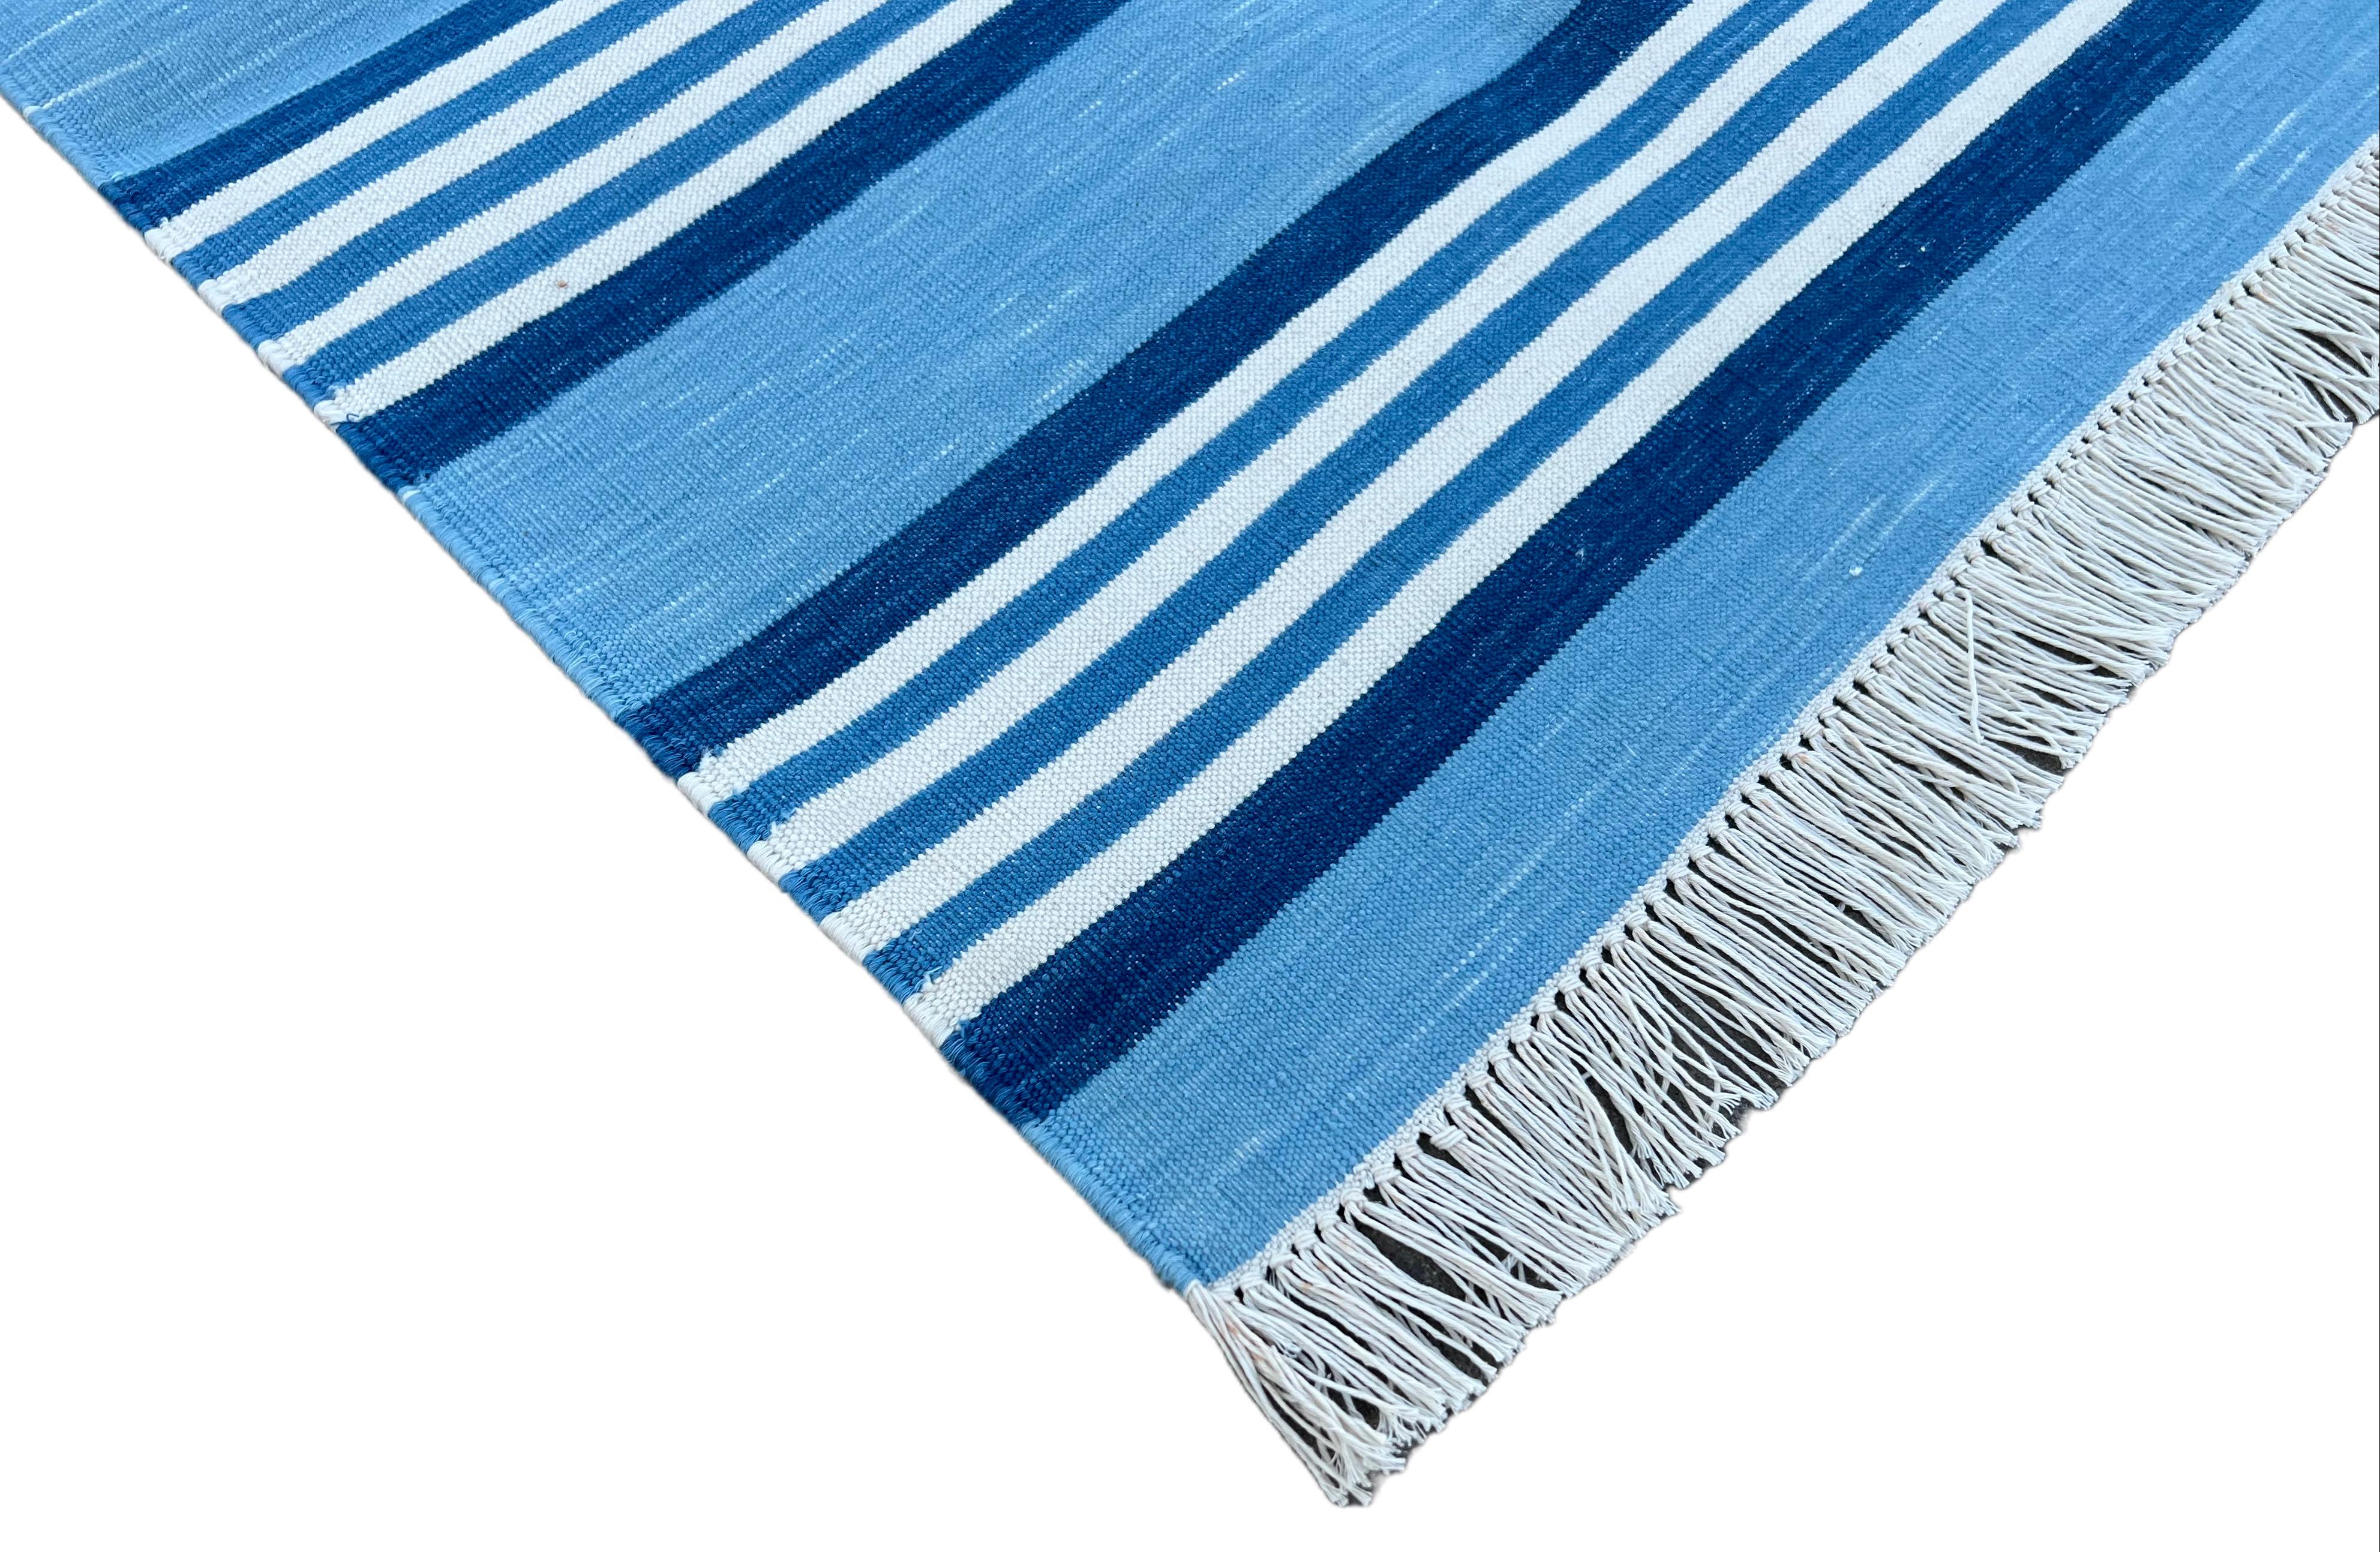 Cotton Natural Vegetable Dyed, Blue And White Striped Indian Dhurrie Runner-2'x6'
These special flat-weave dhurries are hand-woven with 15 ply 100% cotton yarn. Due to the special manufacturing techniques used to create our rugs, the size and color